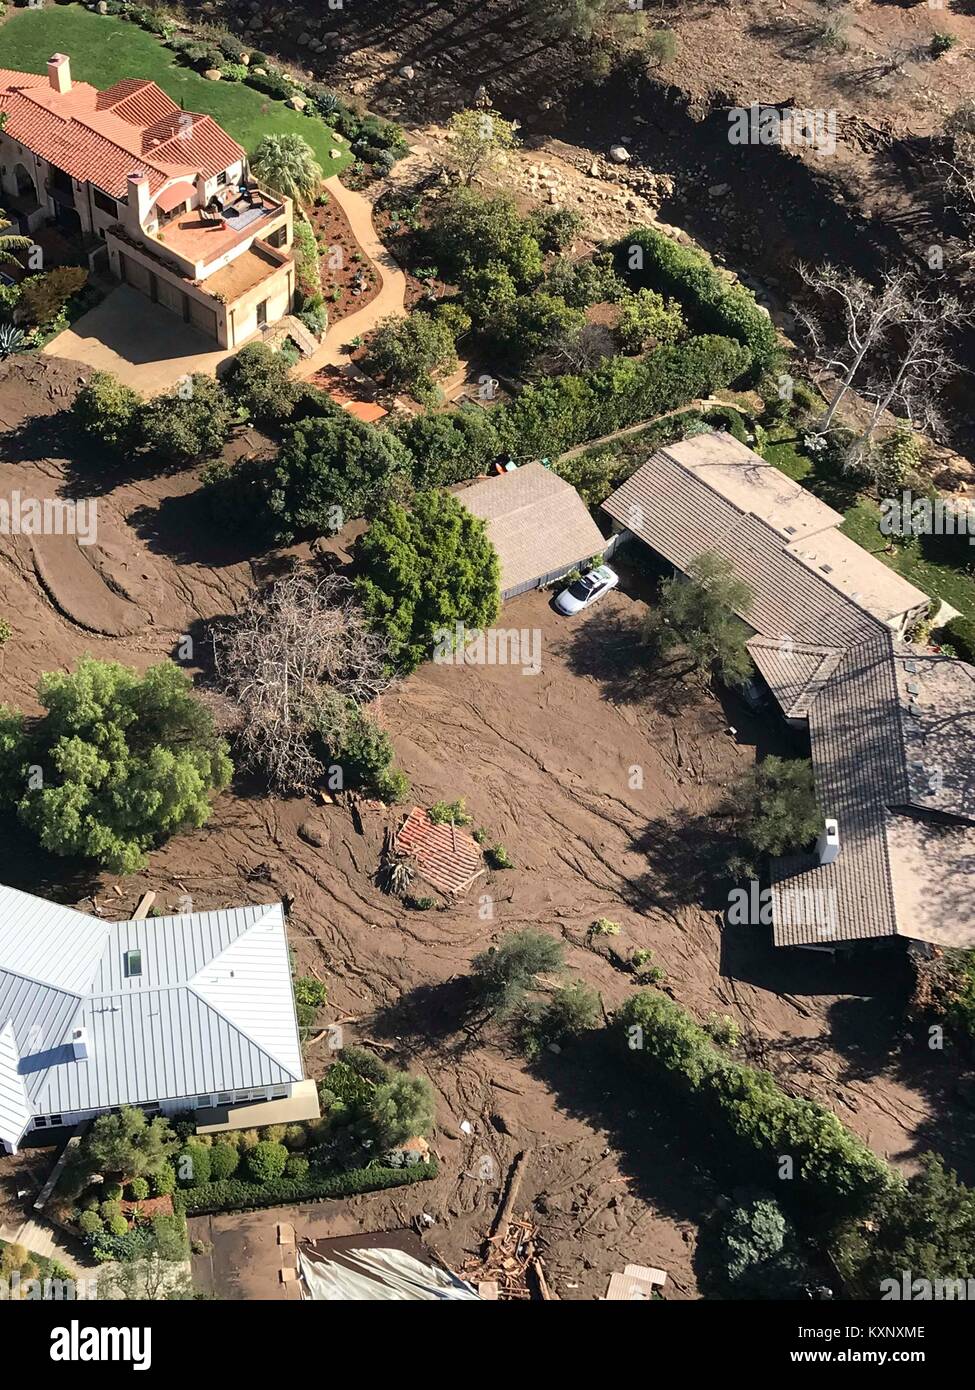 Montecito, United States. 10th Jan, 2018. A U.S. National Guard helicopter performs an aerial search for survivors in homes destroyed by massive mudslides after record rains fell across a region scorched by wildfires in Santa Barbara county January 10, 2018 in Montecito, California. Credit: Planetpix/Alamy Live News Stock Photo